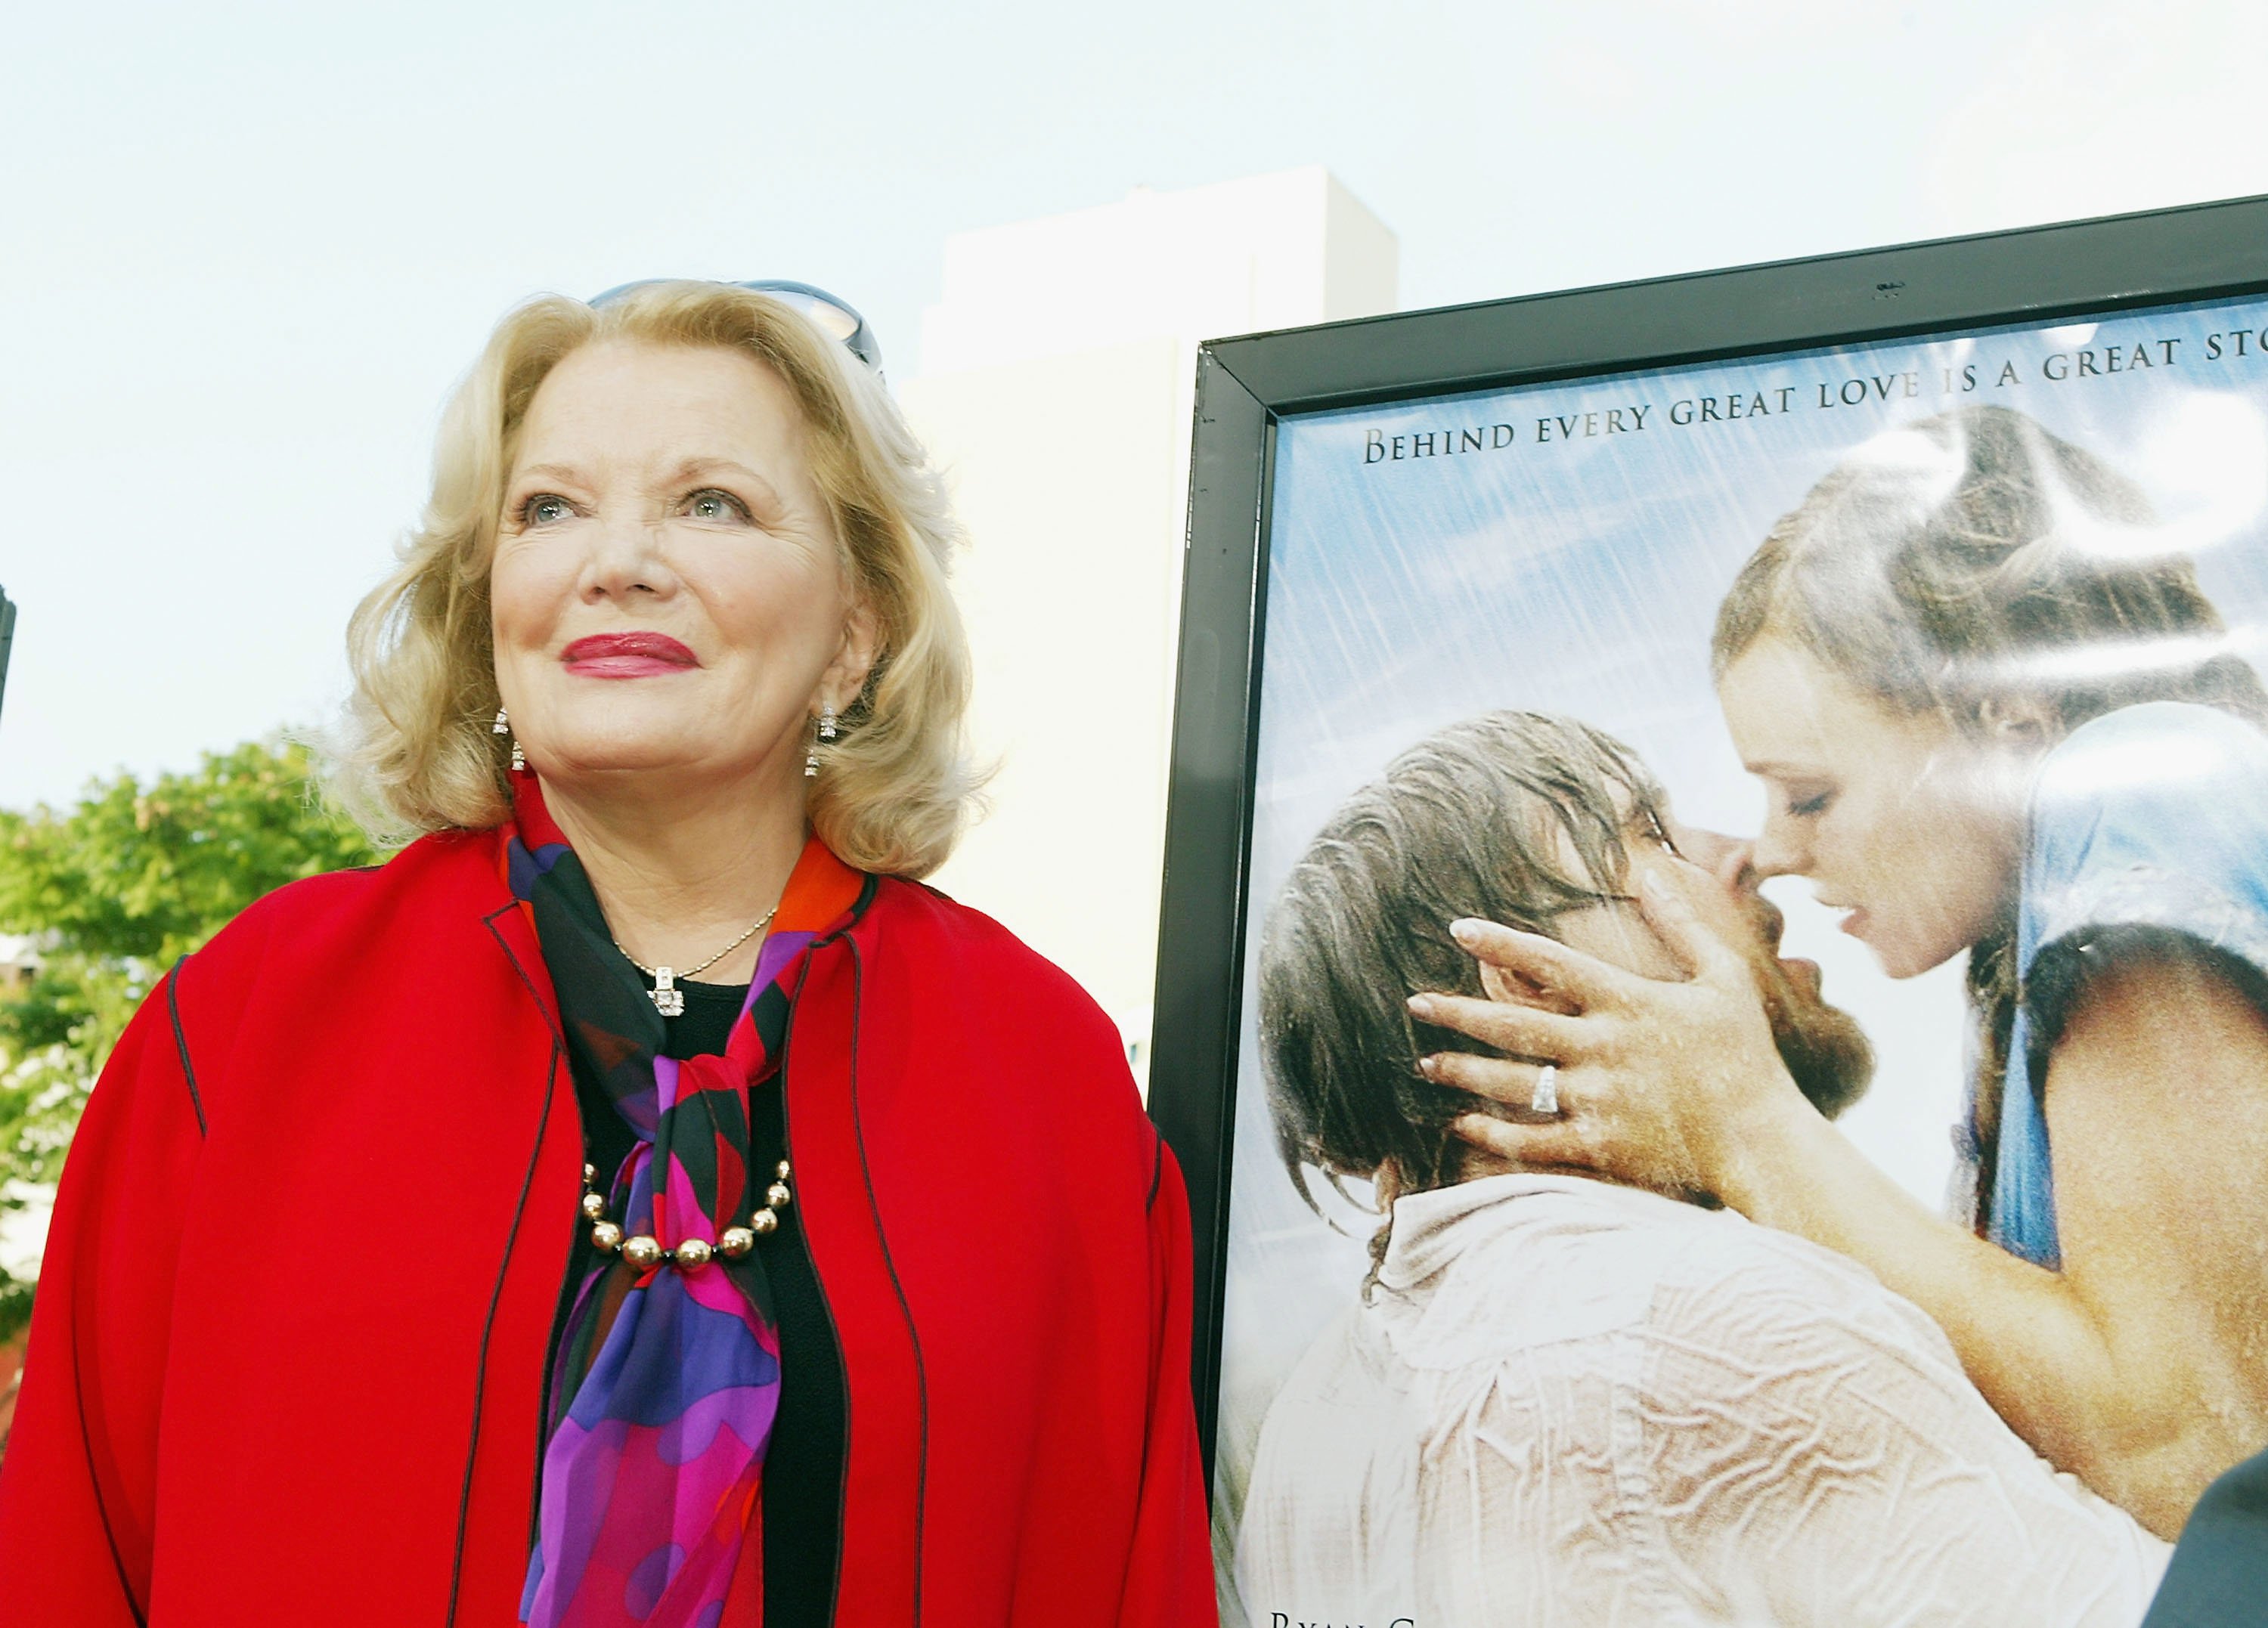 The Notebook cast member Gena Rowlands at the premiere